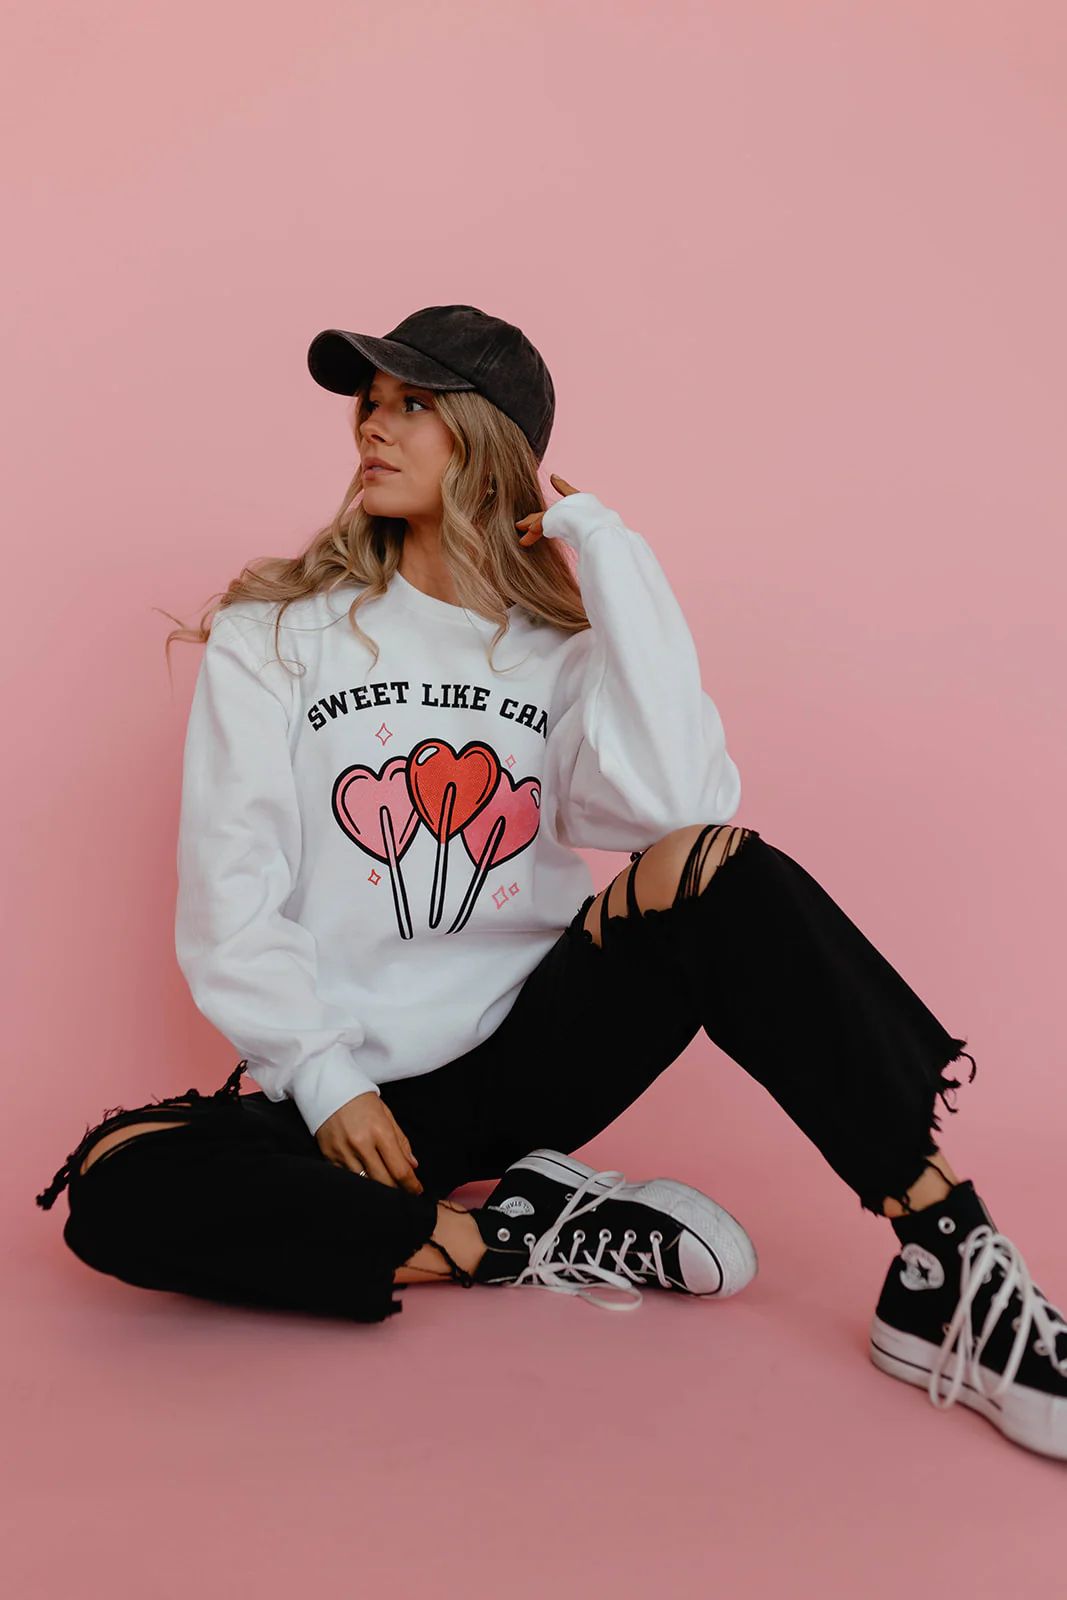 THE SWEET LIKE CANDY PULLOVER IN WHITE BY PINK DESERT | Pink Desert